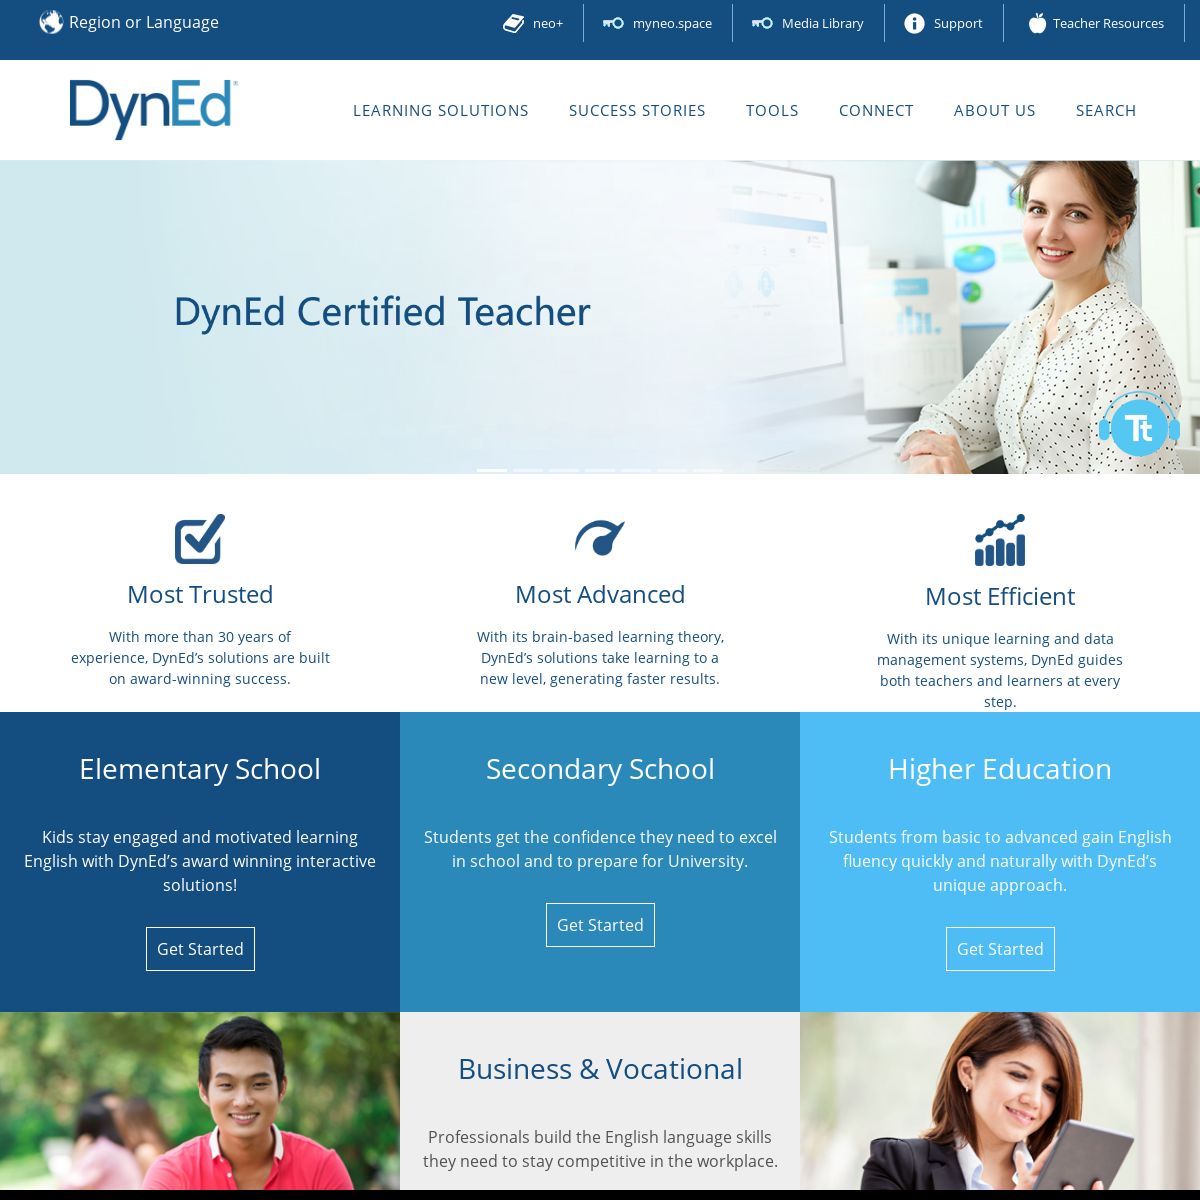 A complete backup of dyned.com